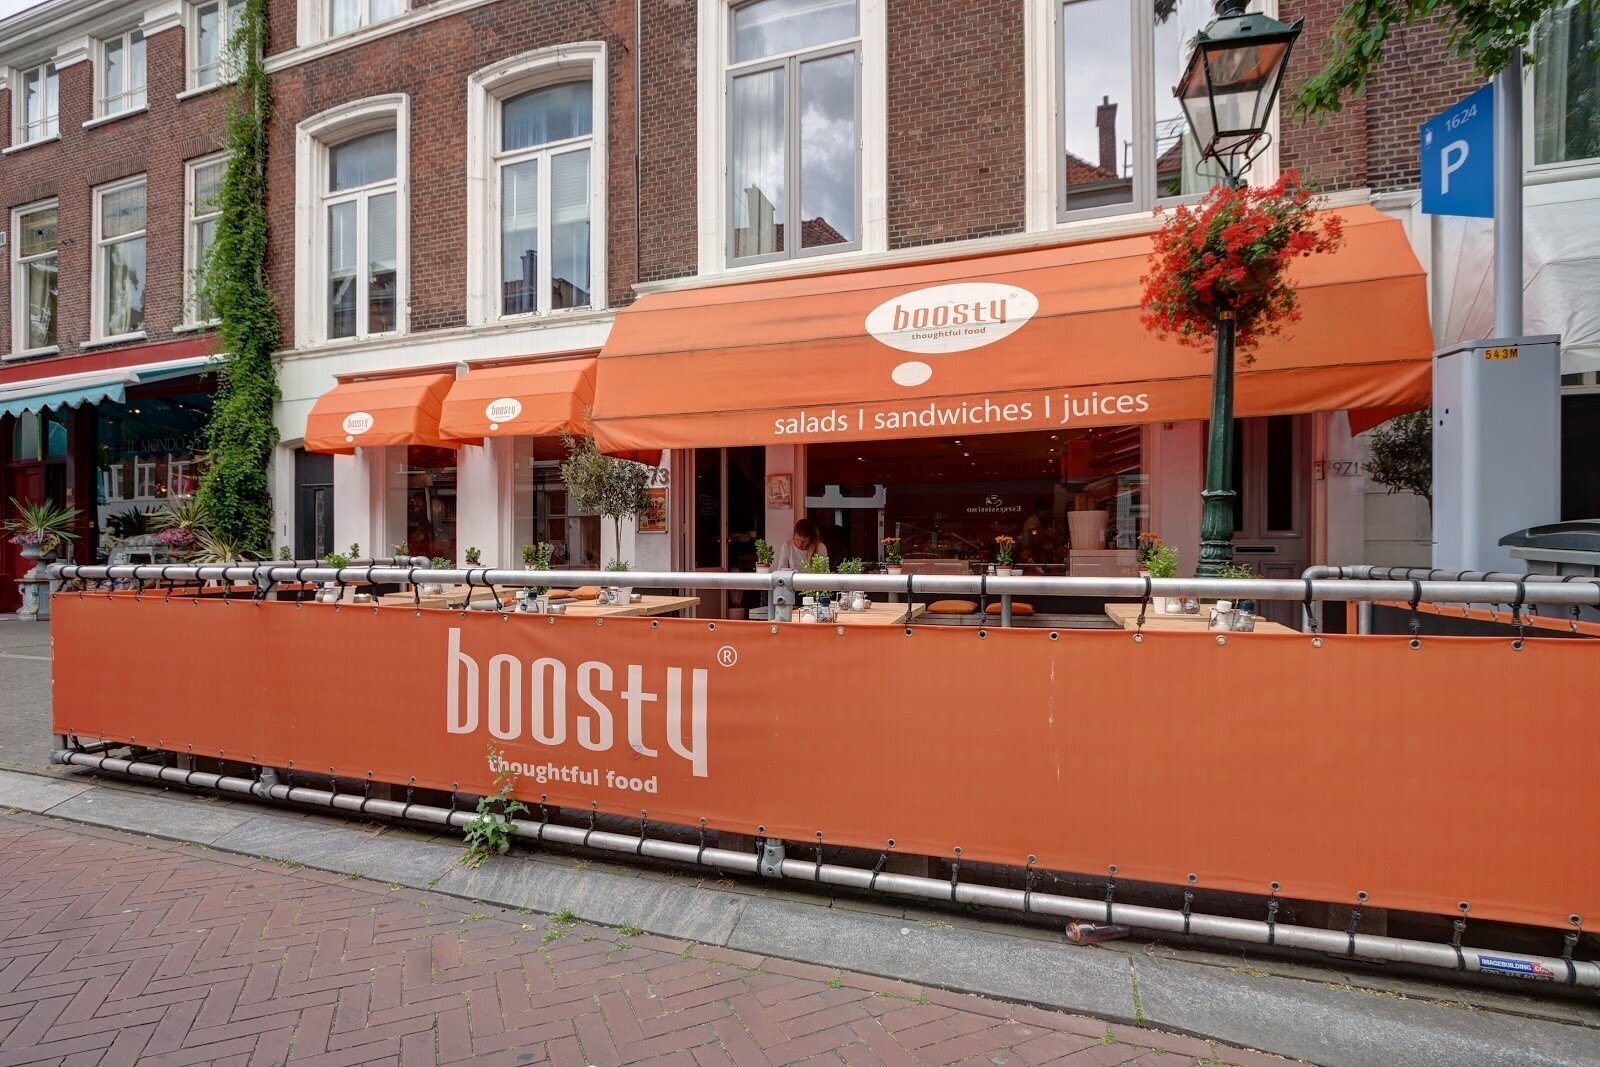 <span class="translation_missing" title="translation missing: en.meta.location_title, location_name: Boosty, thoughtful food, city: Hague">Location Title</span>